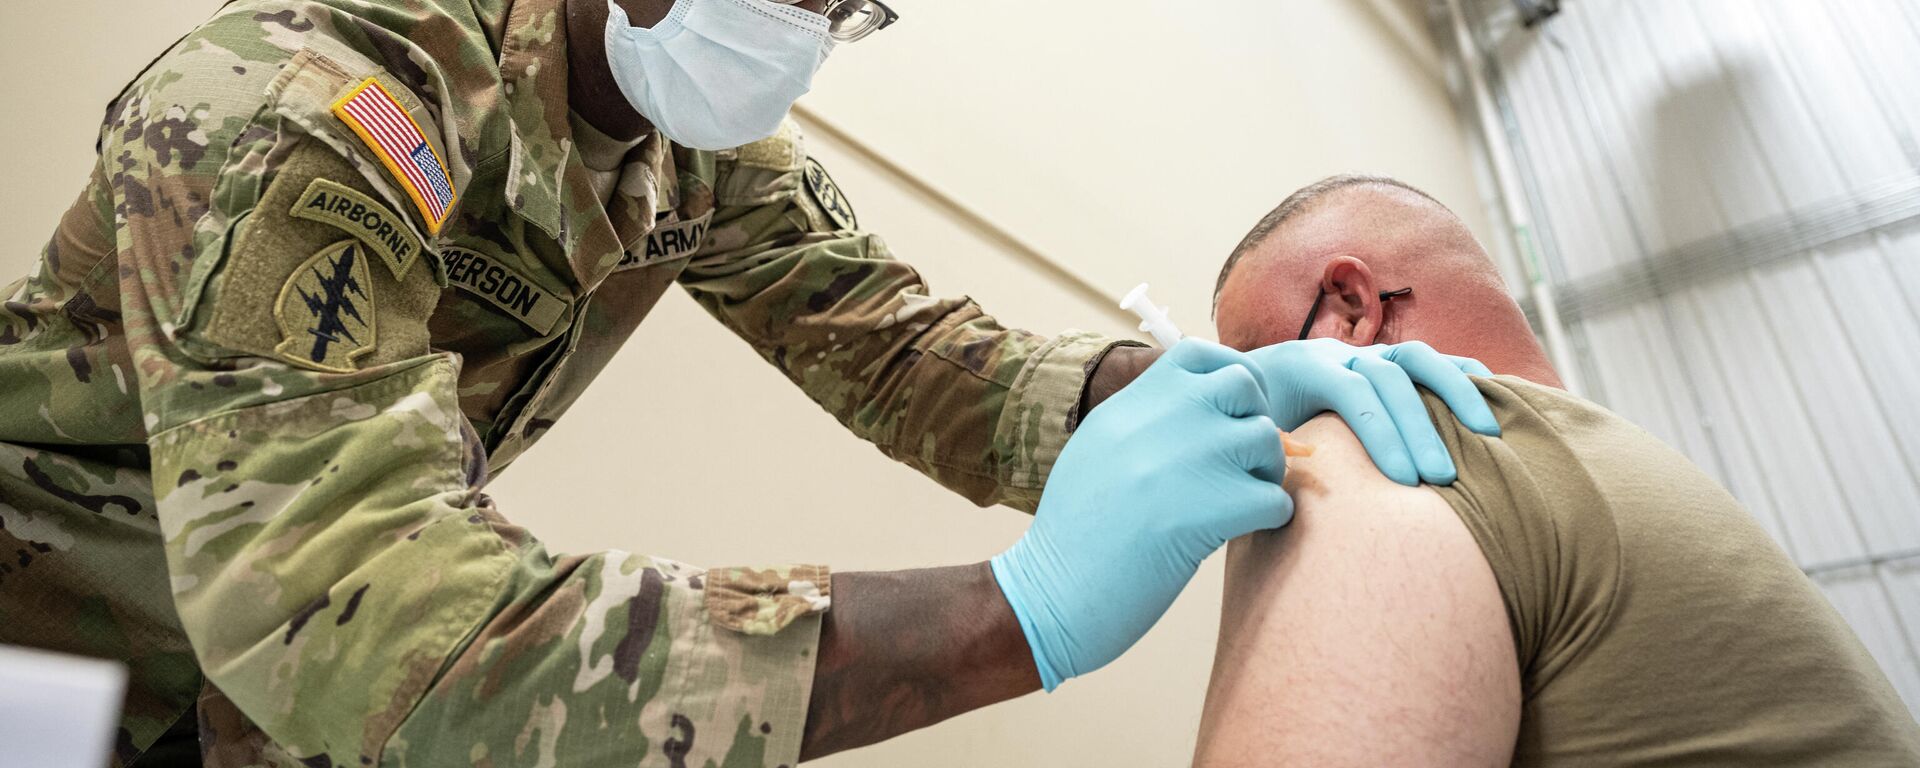 Preventative Medicine Services NCOIC Sergeant First Class Demetrius Roberson administers a COVID-19 vaccine to a soldier on September 9, 2021 in Fort Knox, Kentucky. The Pentagon, with the support of military leaders and U.S. President Joe Biden, mandated COVID-19 vaccination for all military service members in early September. The Pentagon stresses inoculation from COVID-19 and other diseases to avoid outbreaks from impeding the fighting force of the US Military. - Sputnik International, 1920, 13.11.2021